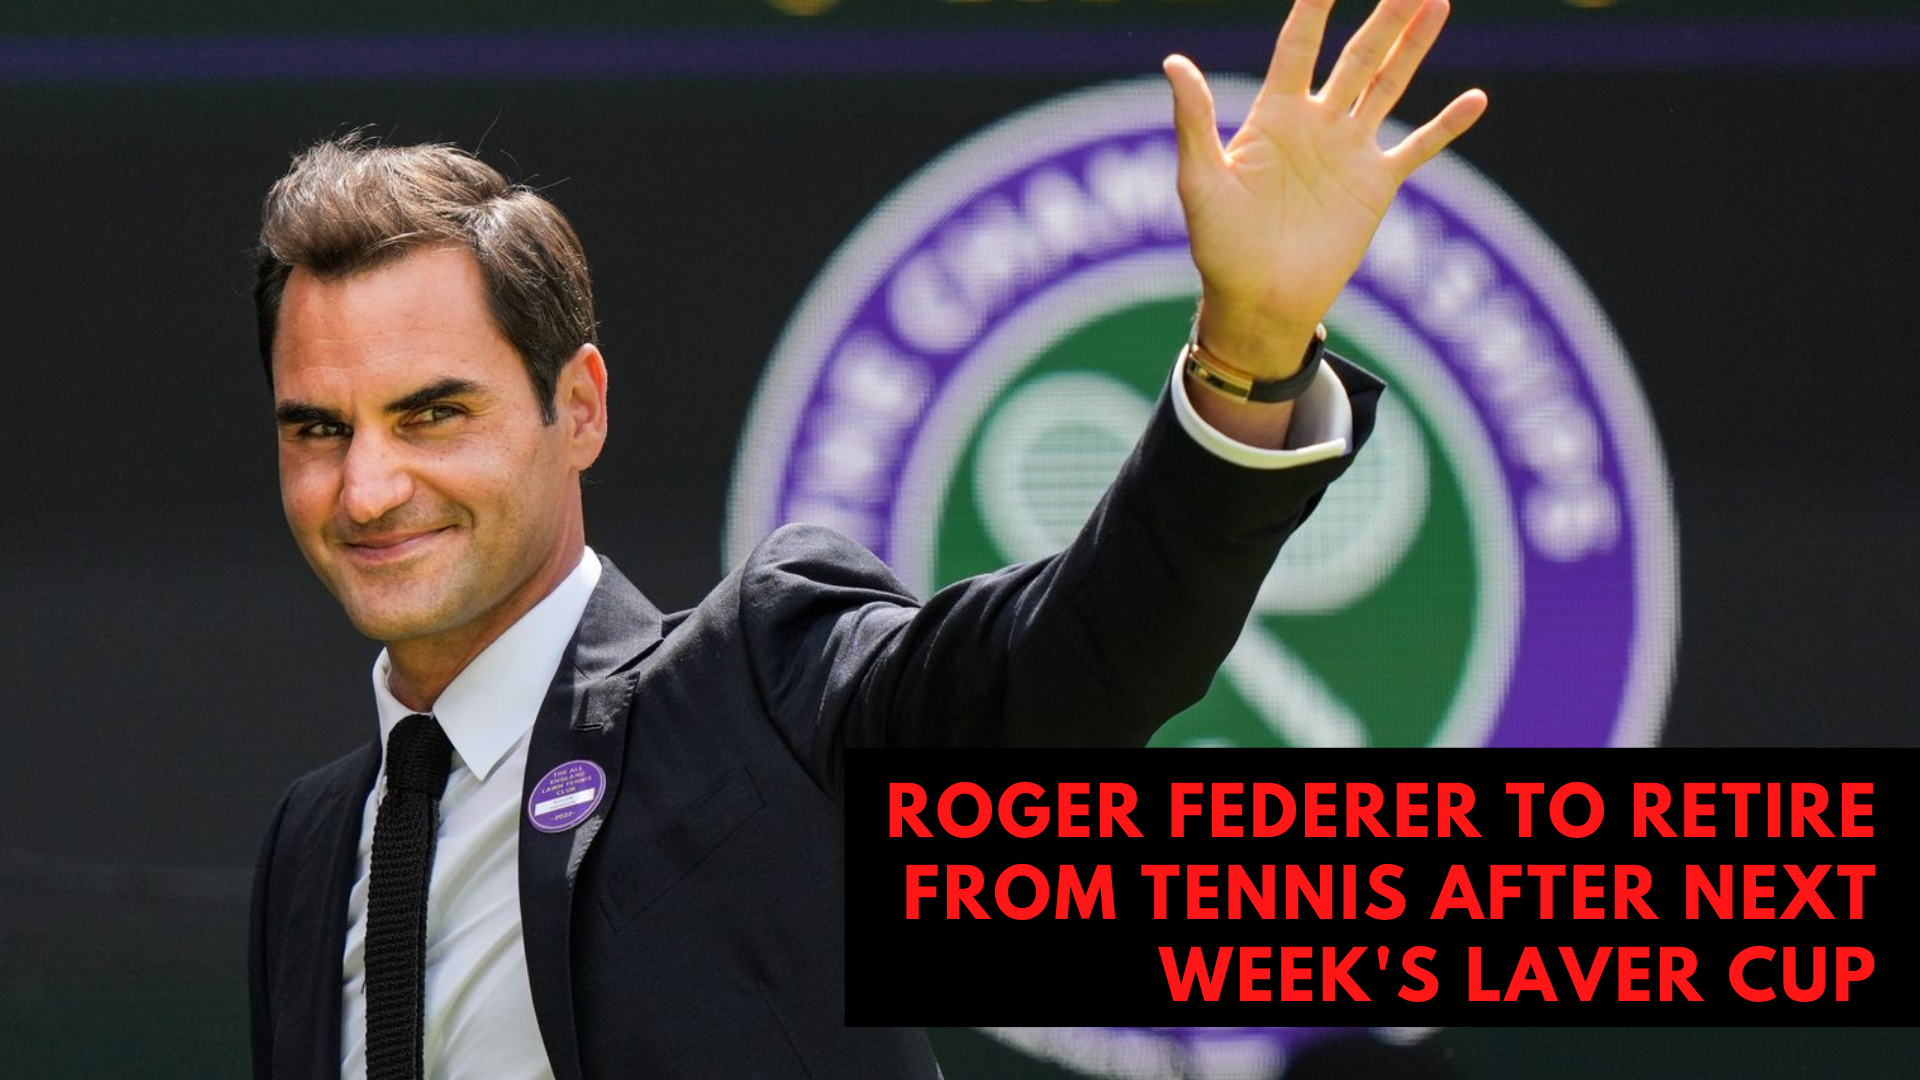 Roger Federer To Retire From Tennis After Next Week's Laver Cup